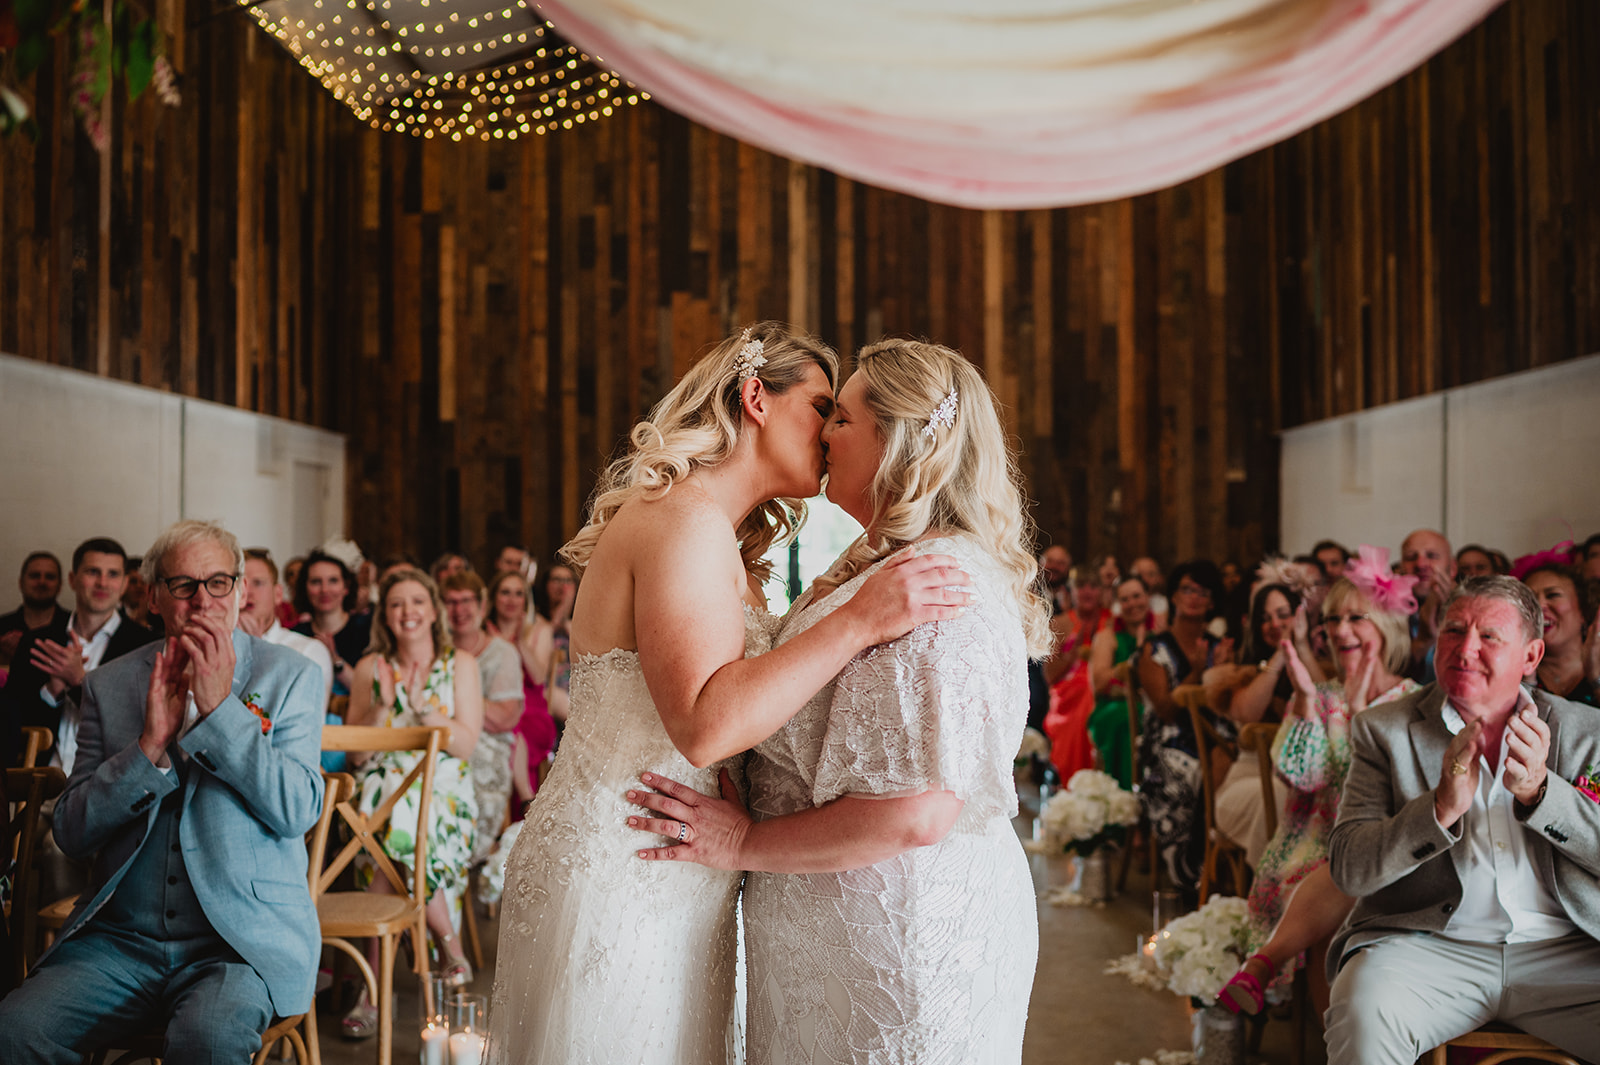 A female same sex couple share their first kiss after getting married